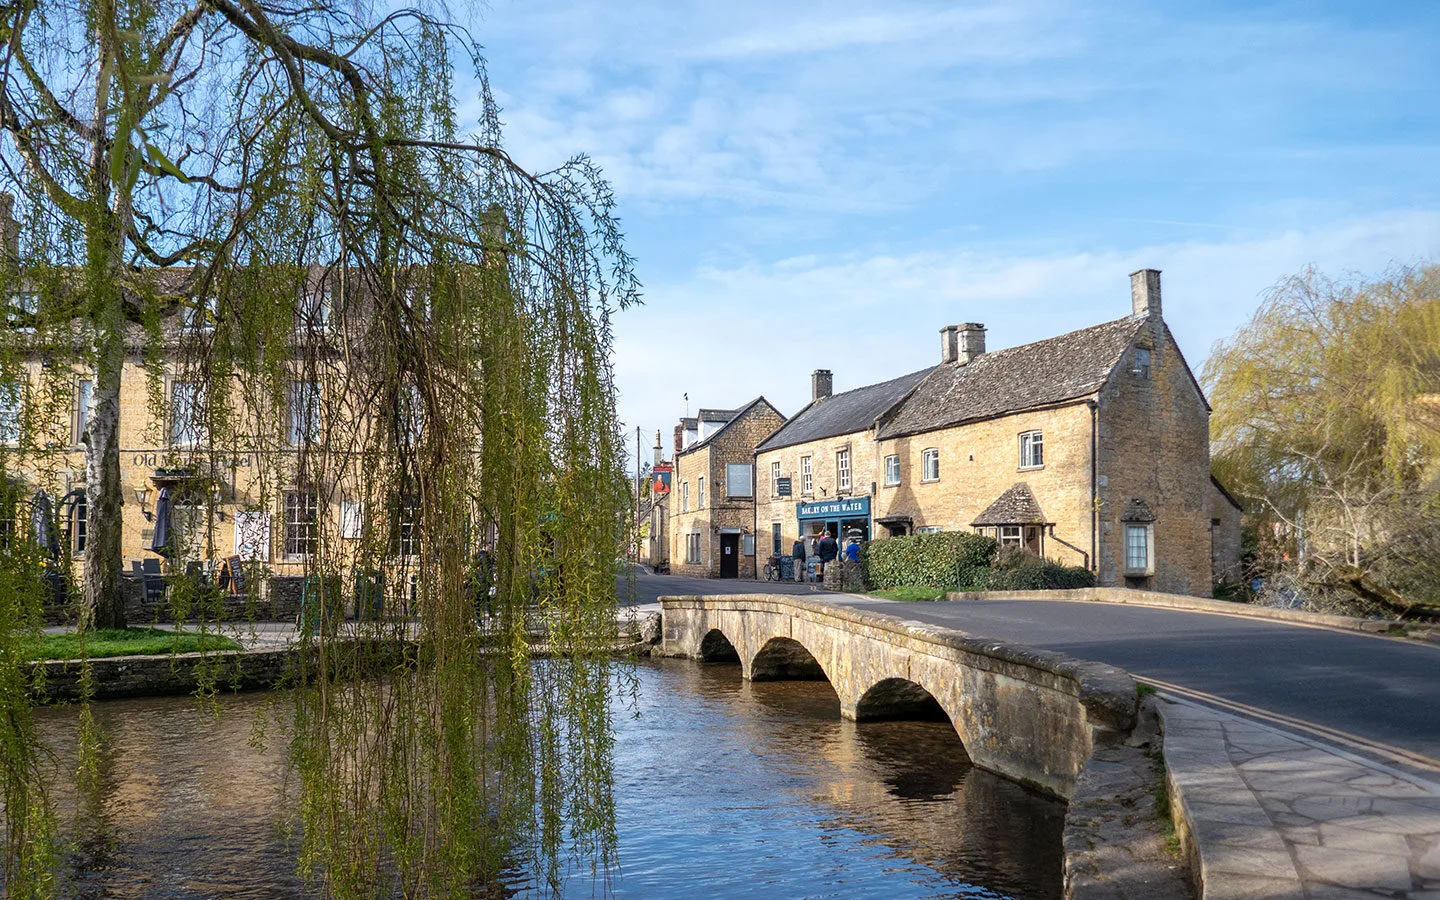 Bourton-on-the-Water in the Cotswolds